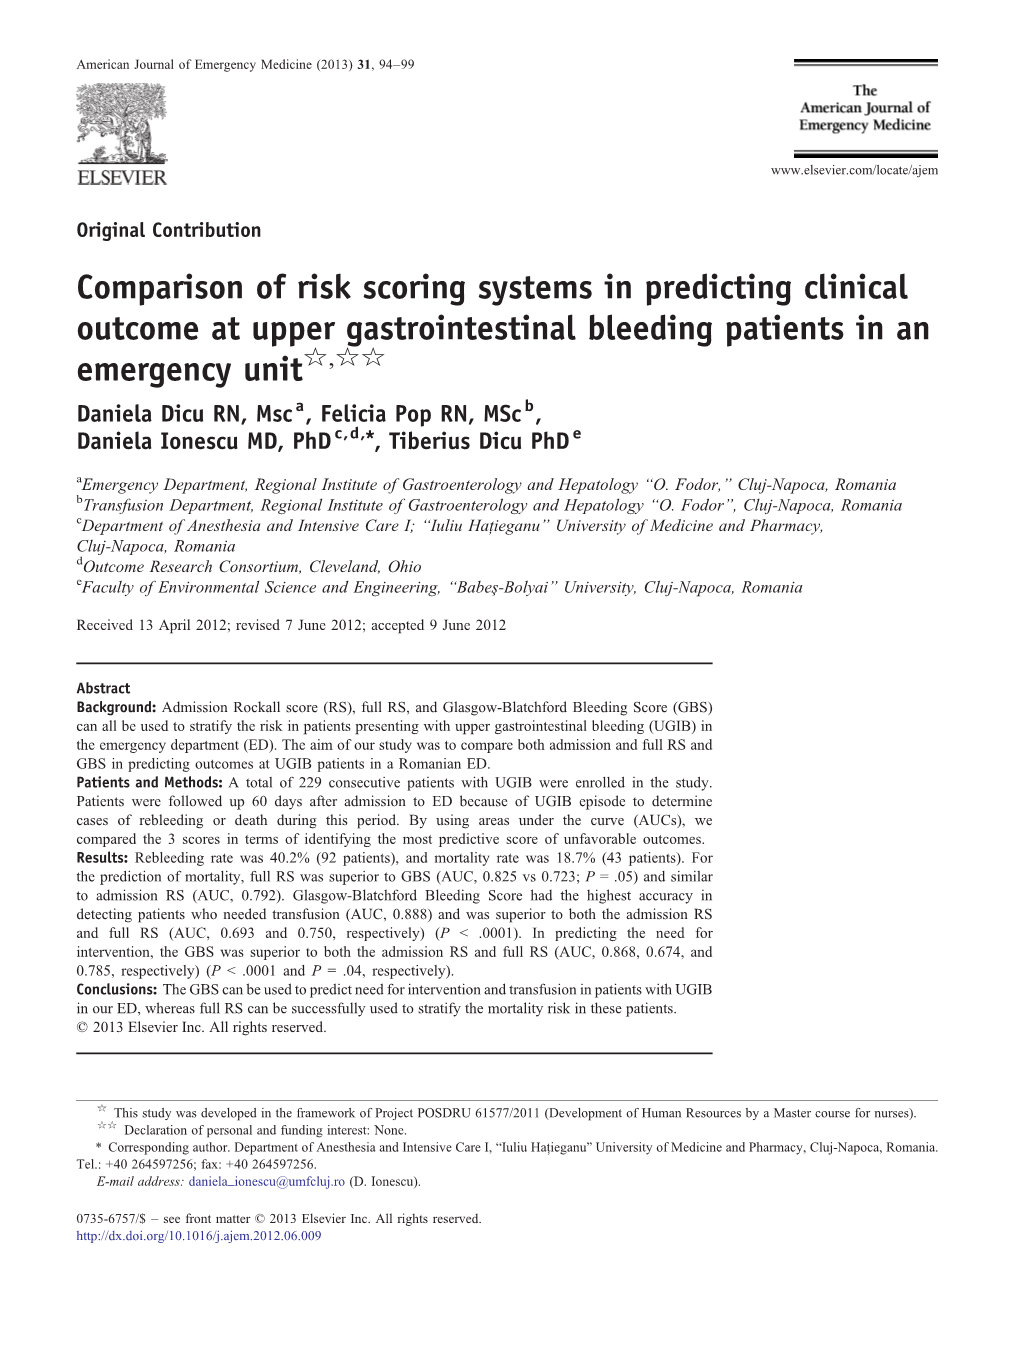 Comparison of Risk Scoring Systems in Predicting Clinical